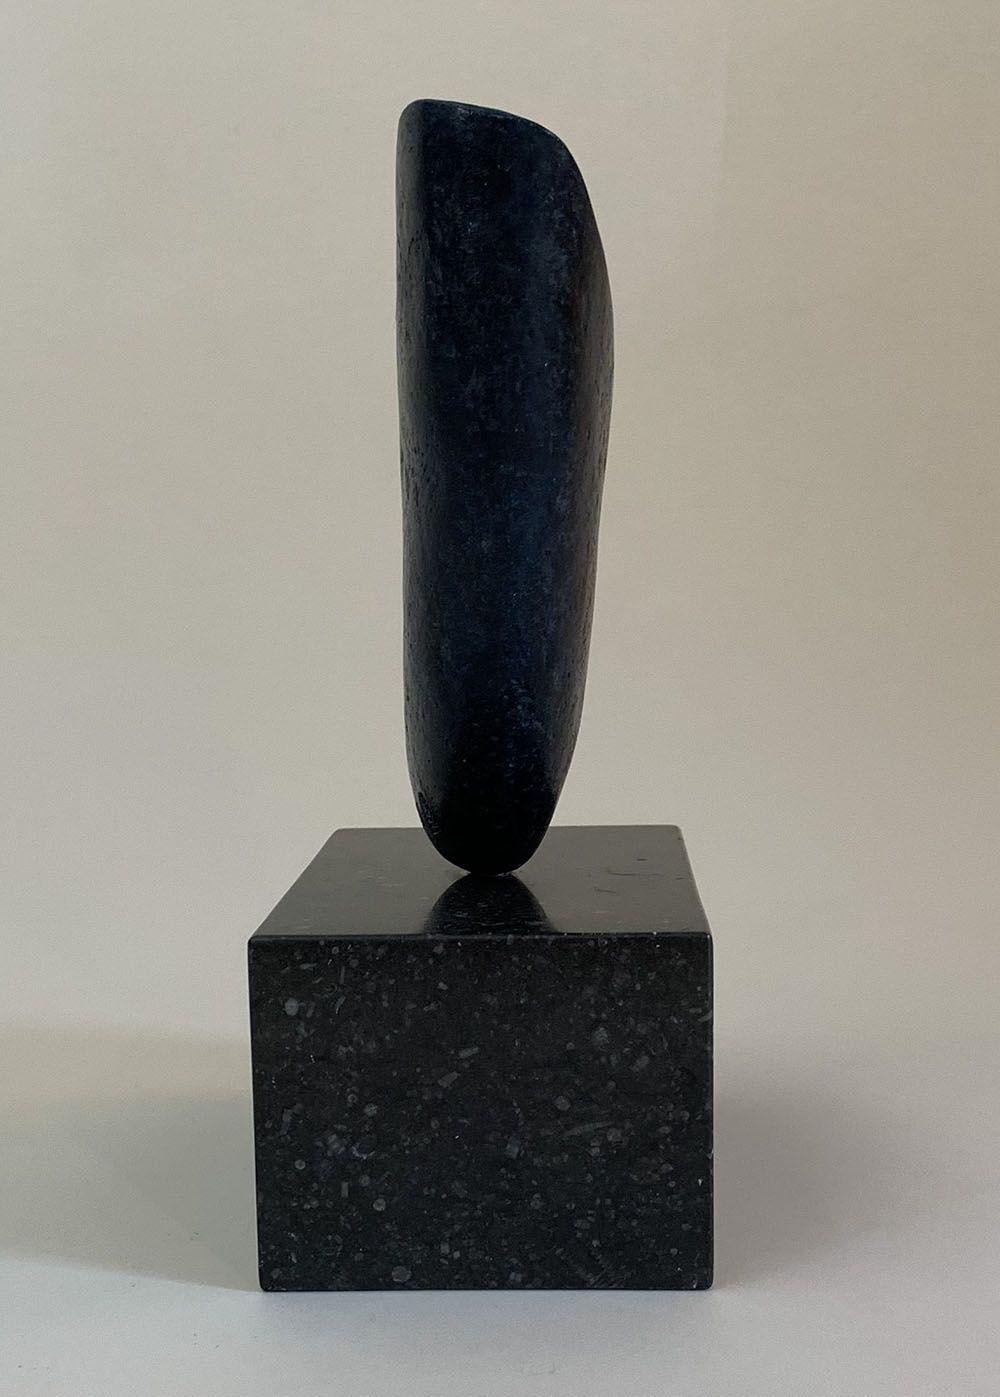 Bronze and Sterling silver on Kilkenny limestone, 24 cm × 18 cm × 10 cm. Edition of 6. 
Peter Brooke-Ball's works surprise with their humour, simplicity and sensuality. As he himself states, the desire is to create 